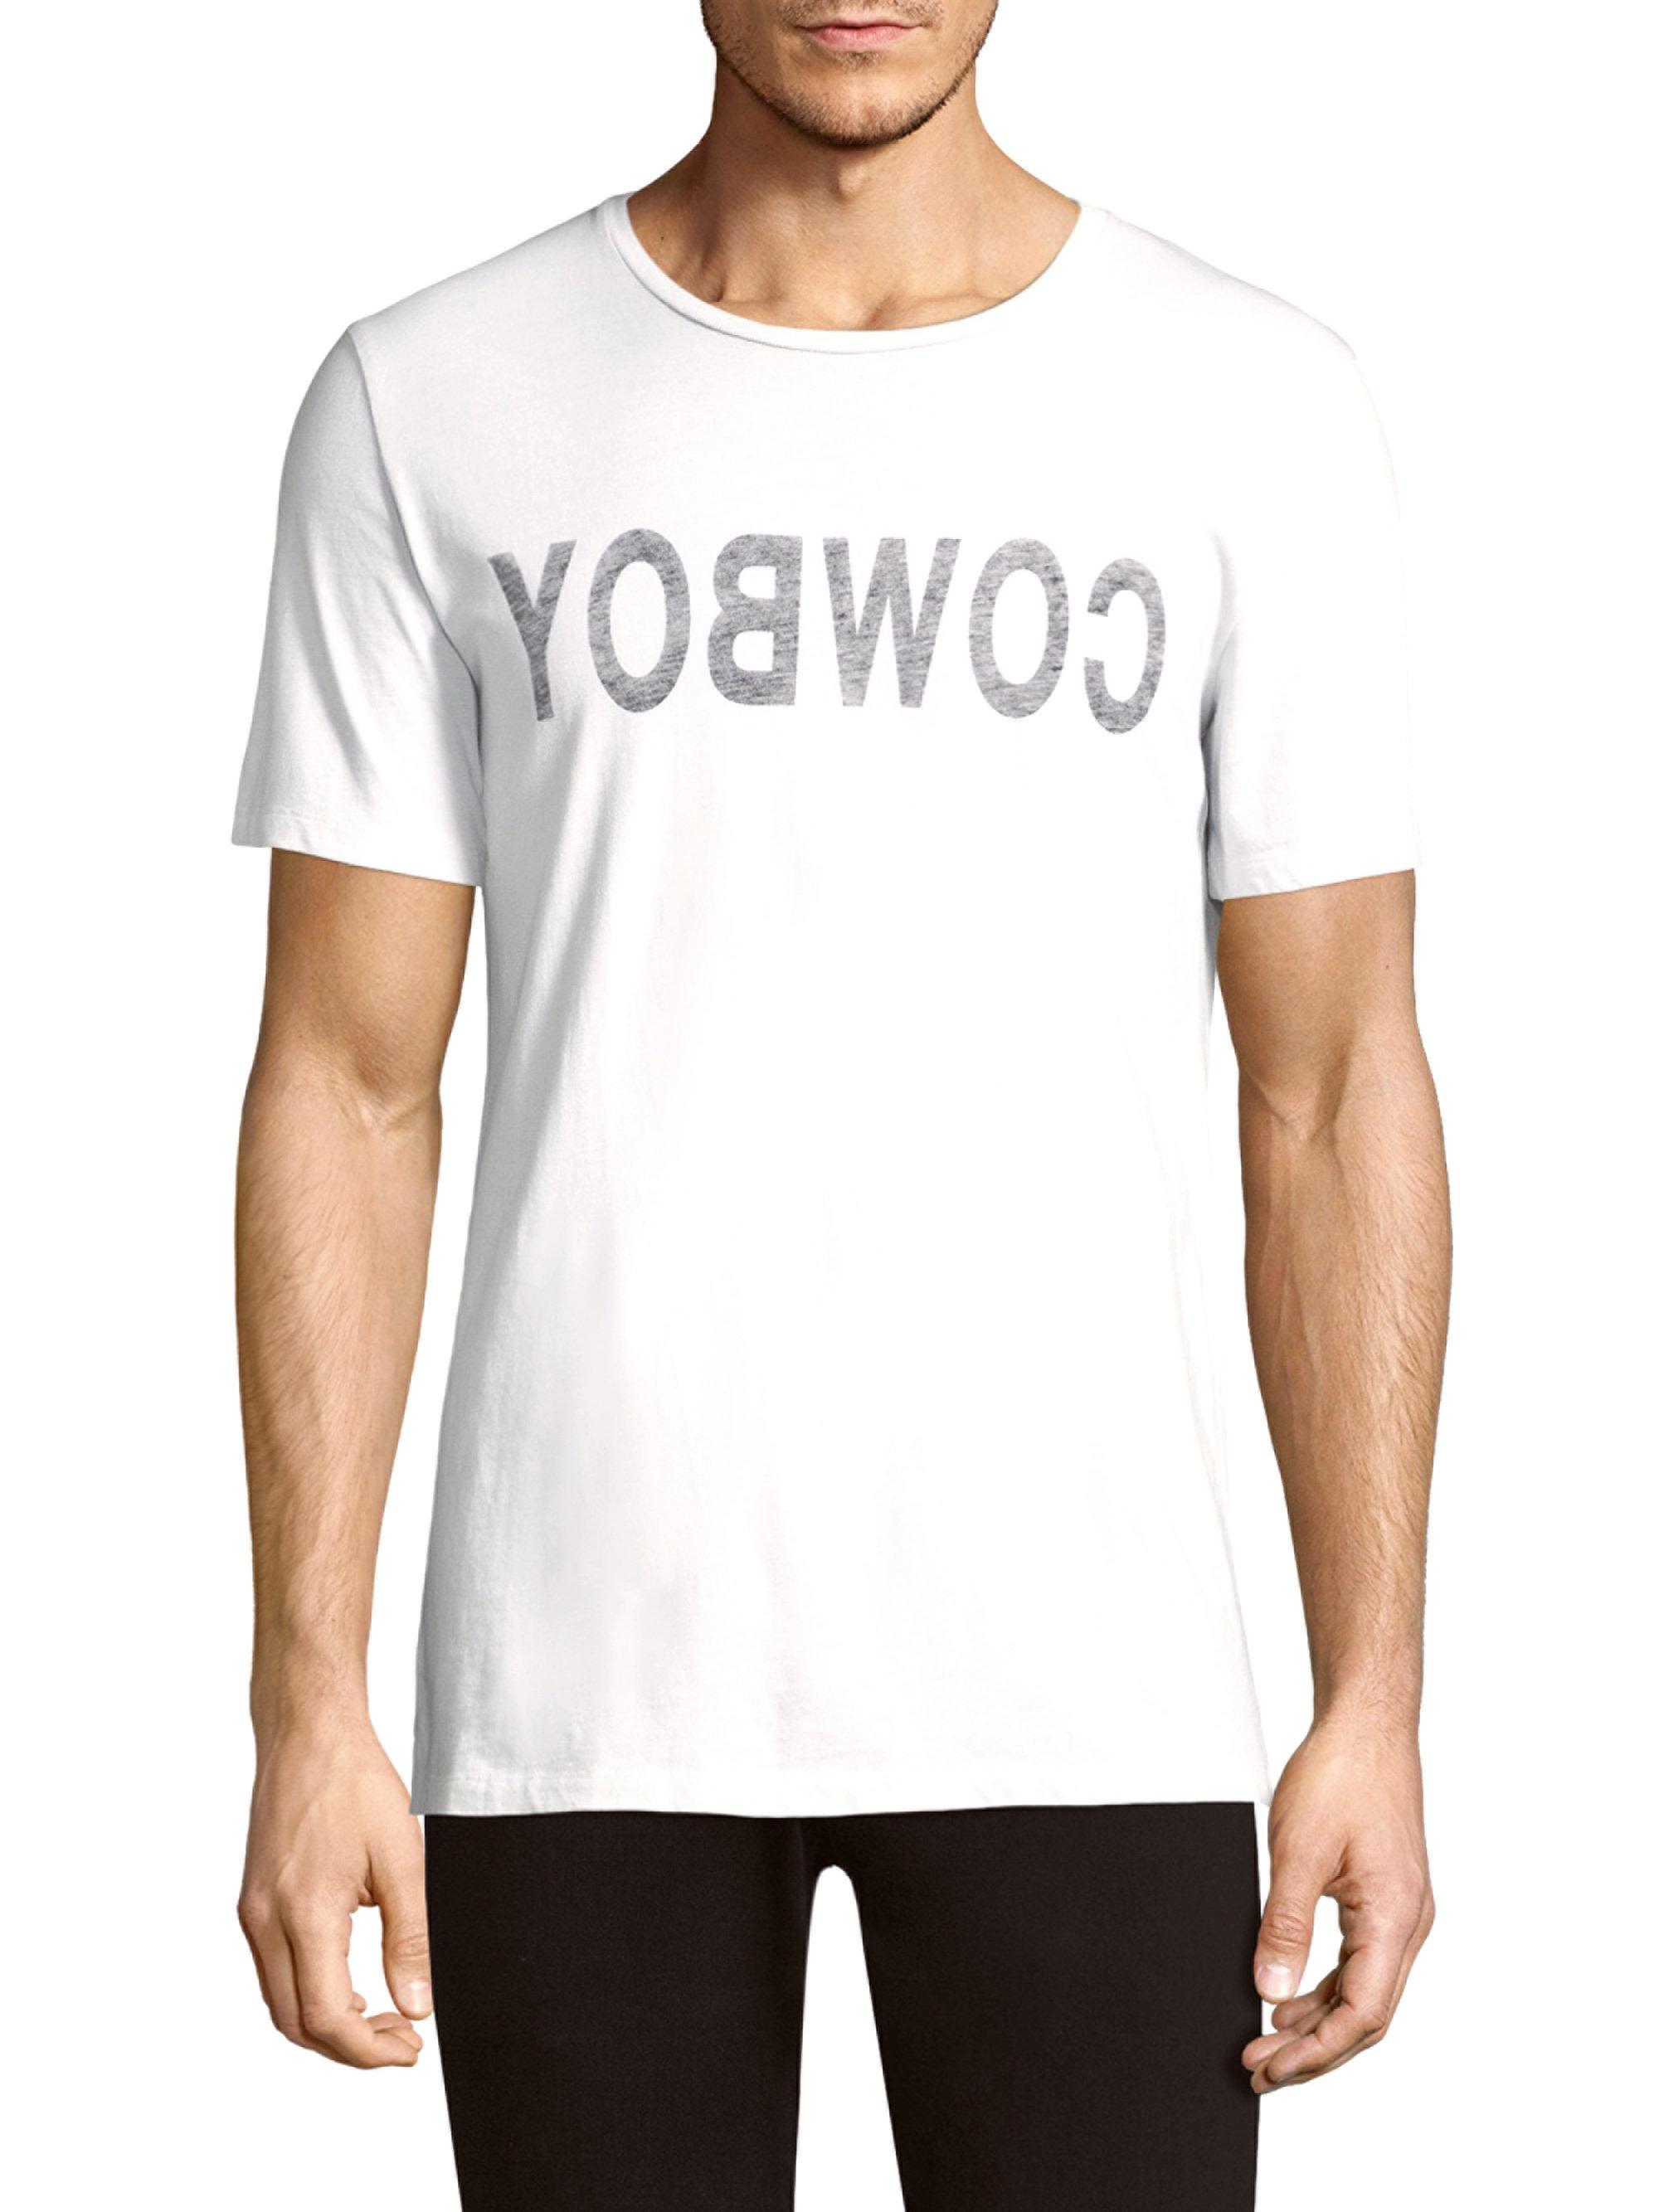 Helmut Lang Cowboy Cotton Tee in White for Men - Lyst